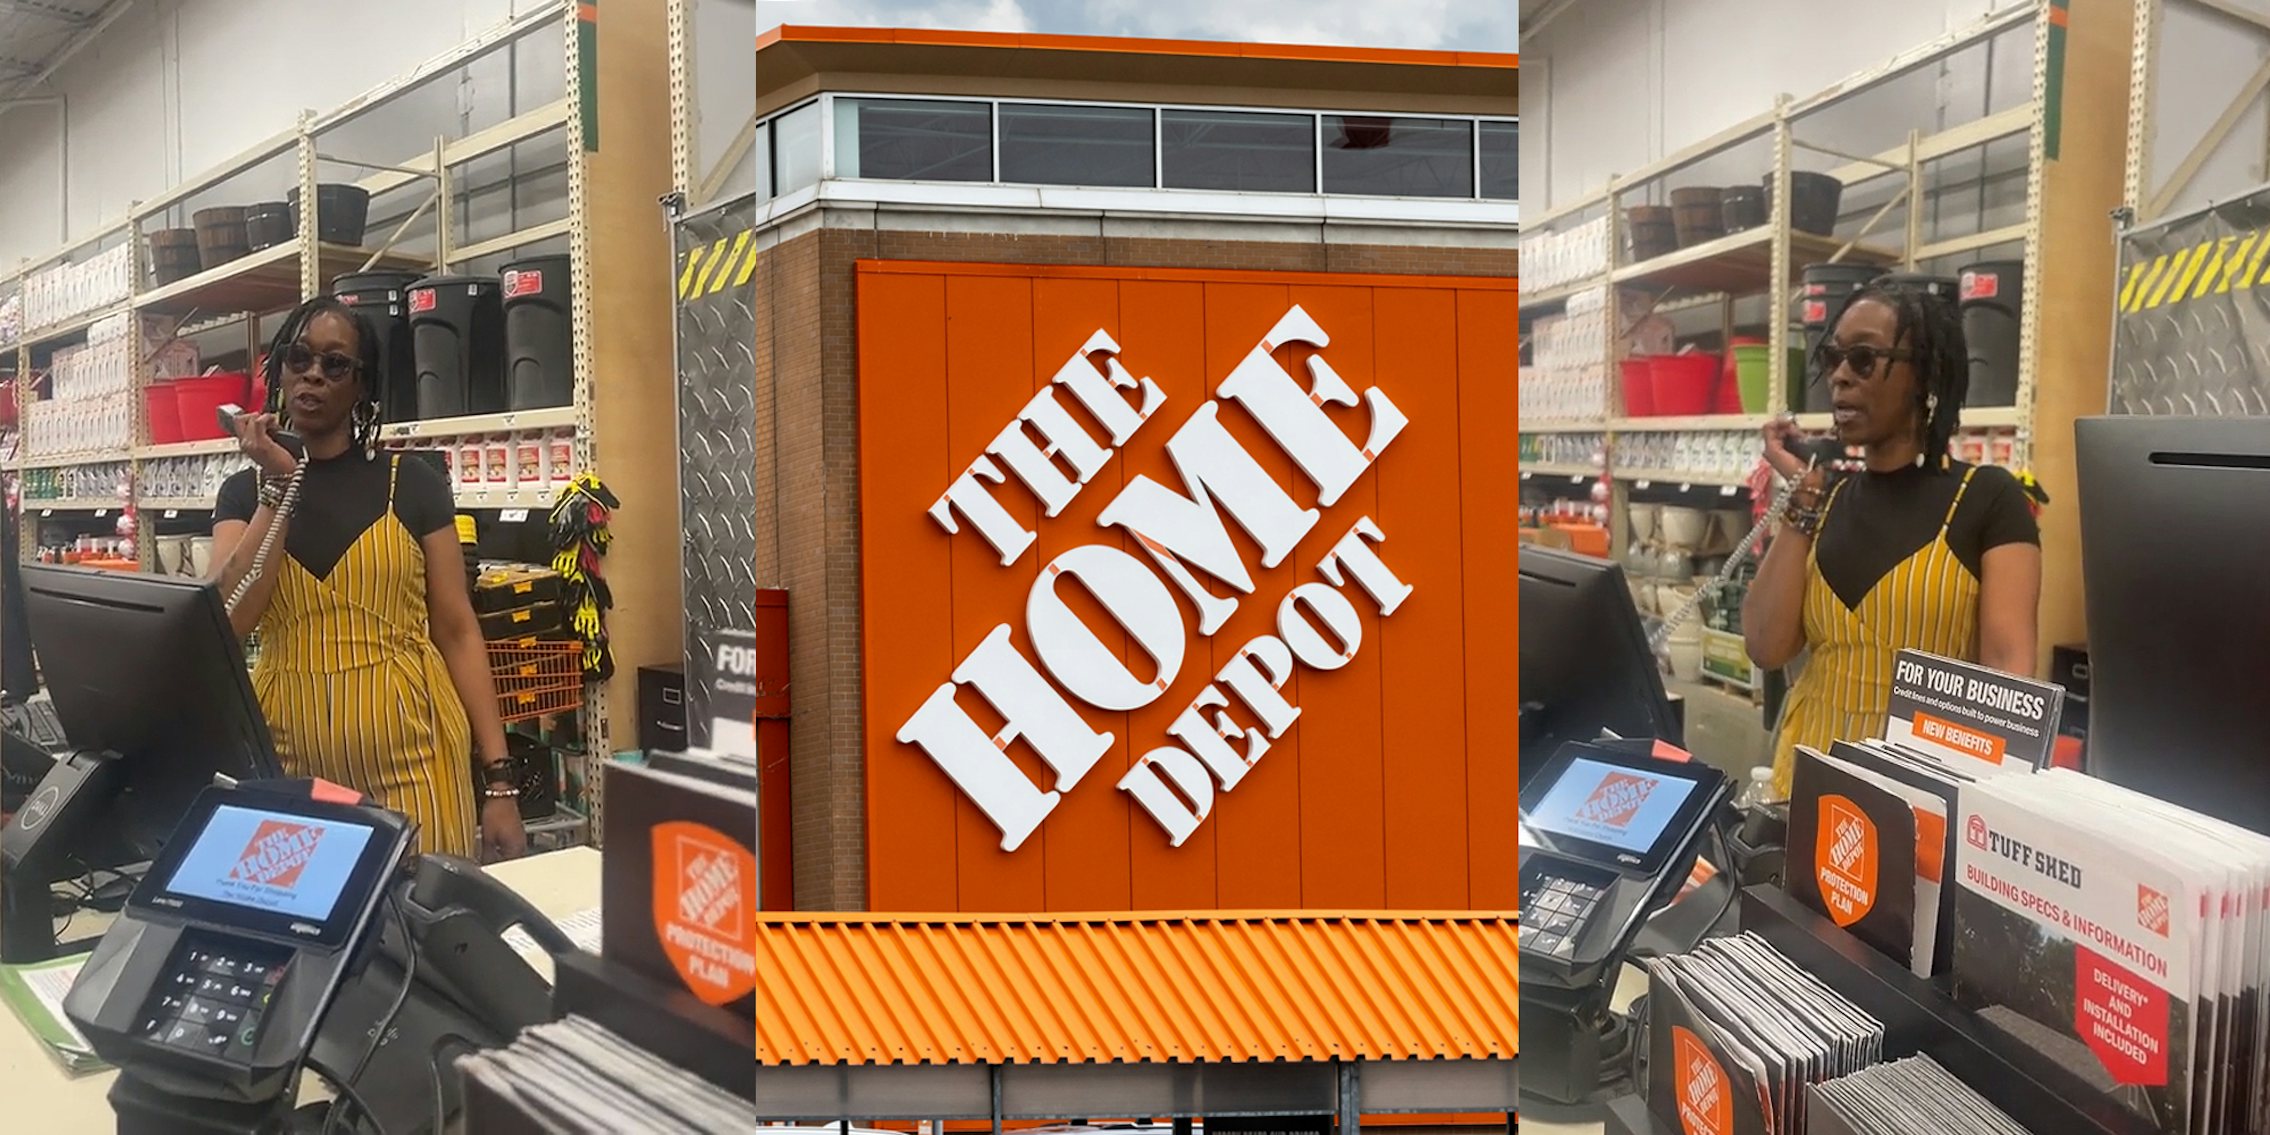 Home Depot worker speaking behind counter into store intercom (l) The Home Depot sign on building (c) Home Depot worker speaking behind counter into store intercom (r)